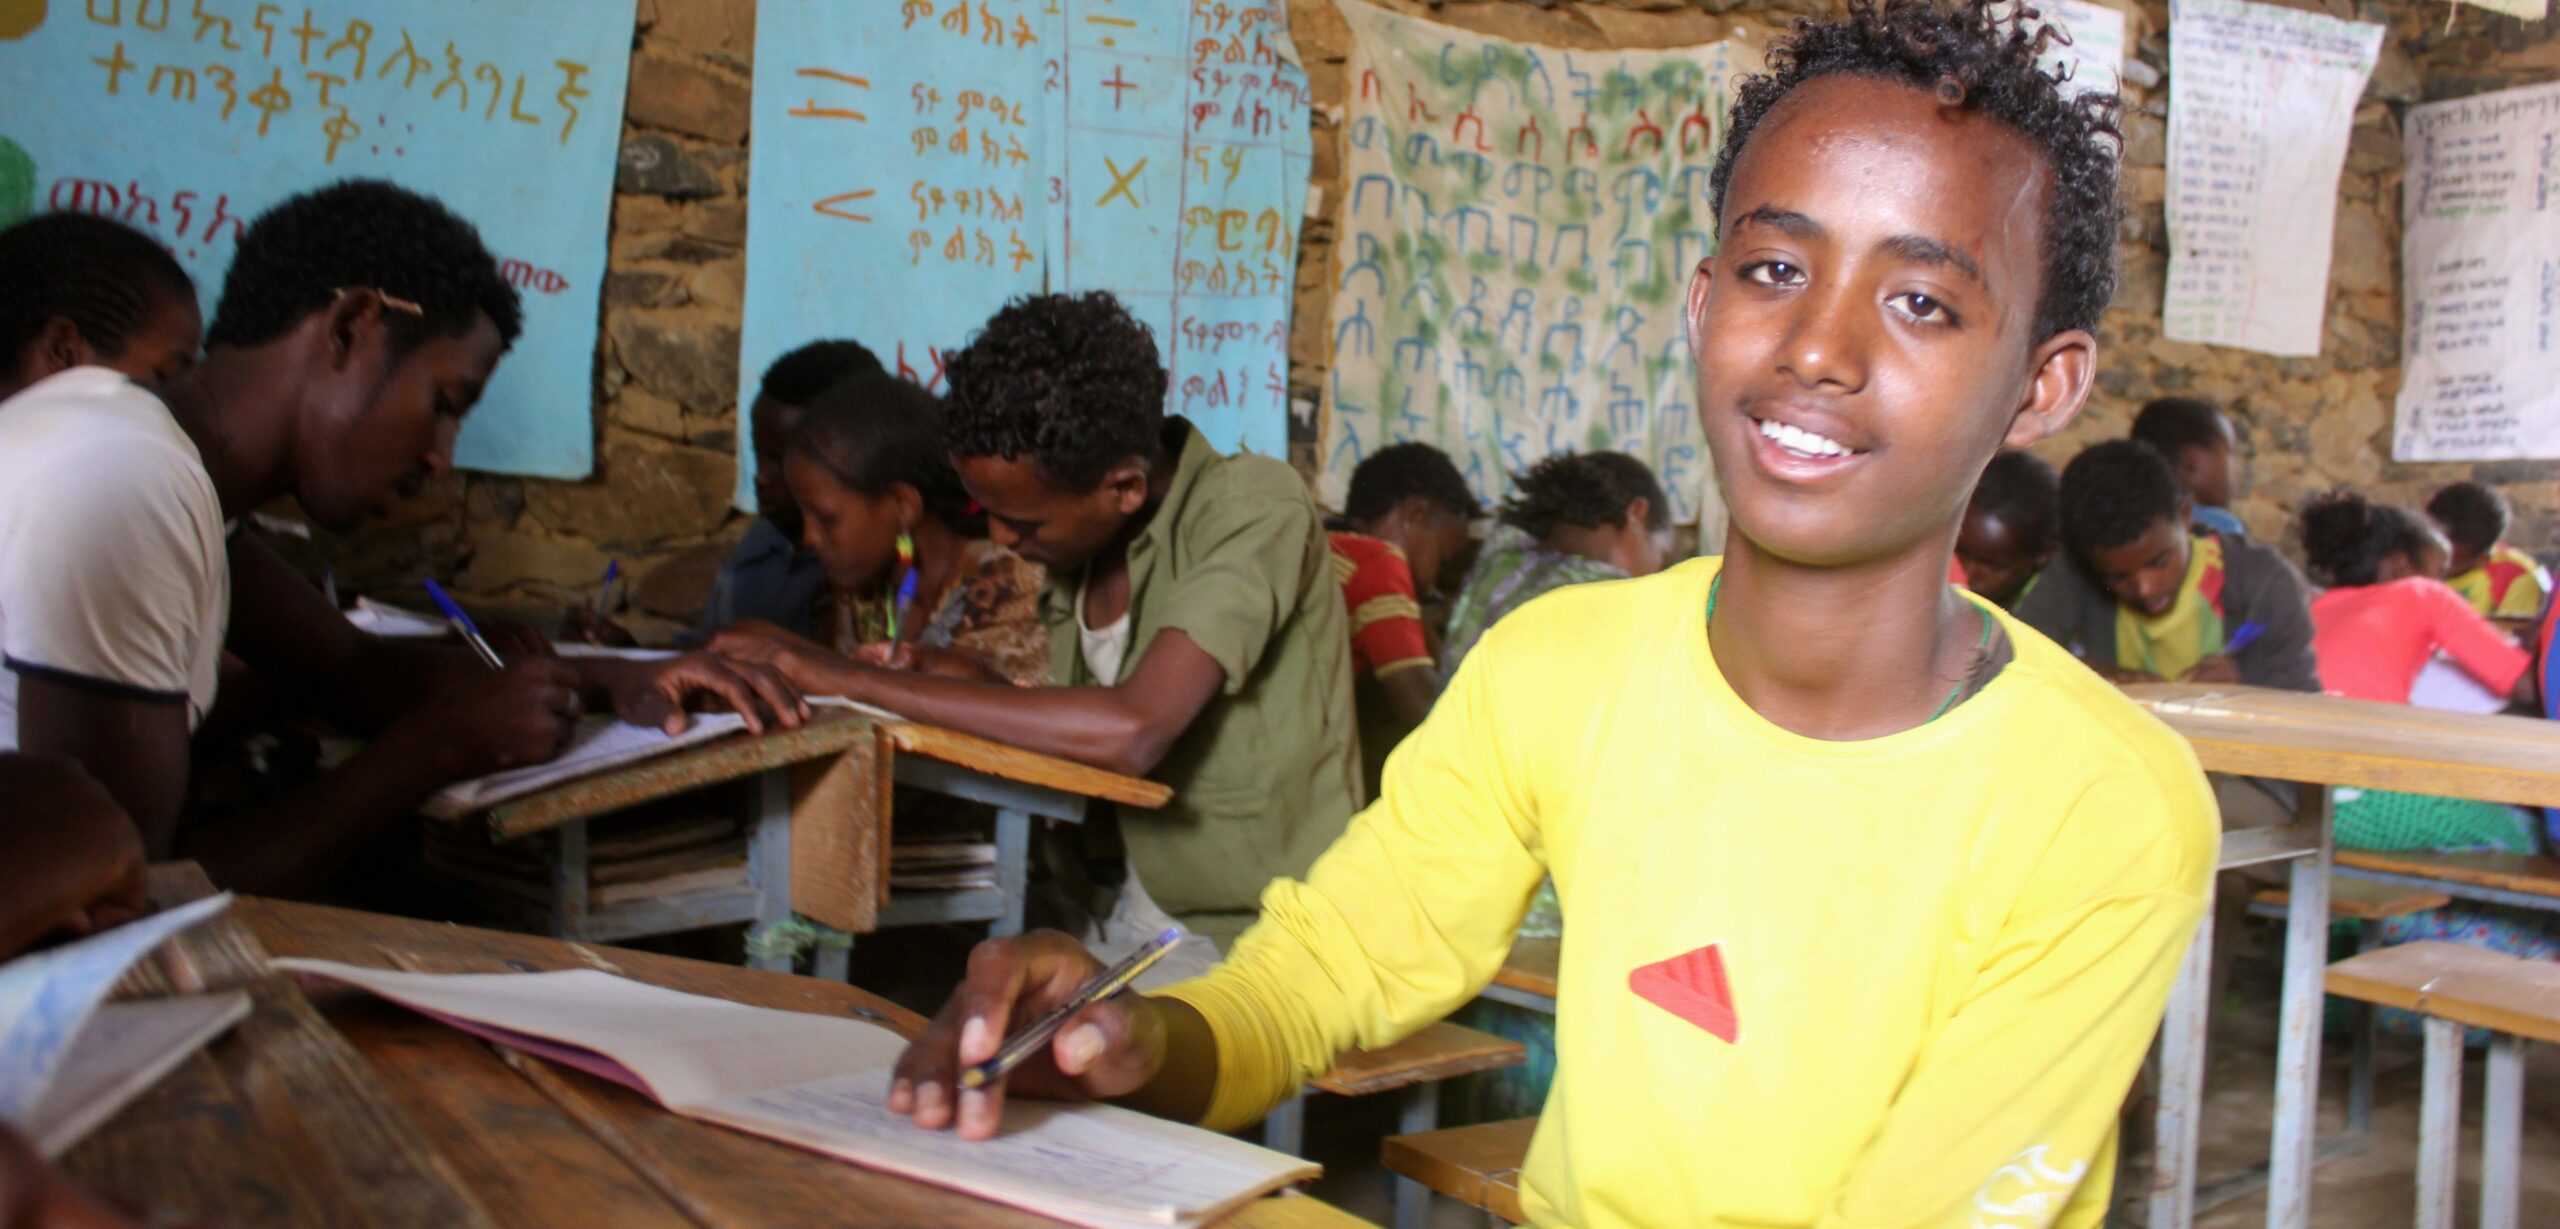 Hayelom in his classrooms in Northern Ethiopia.